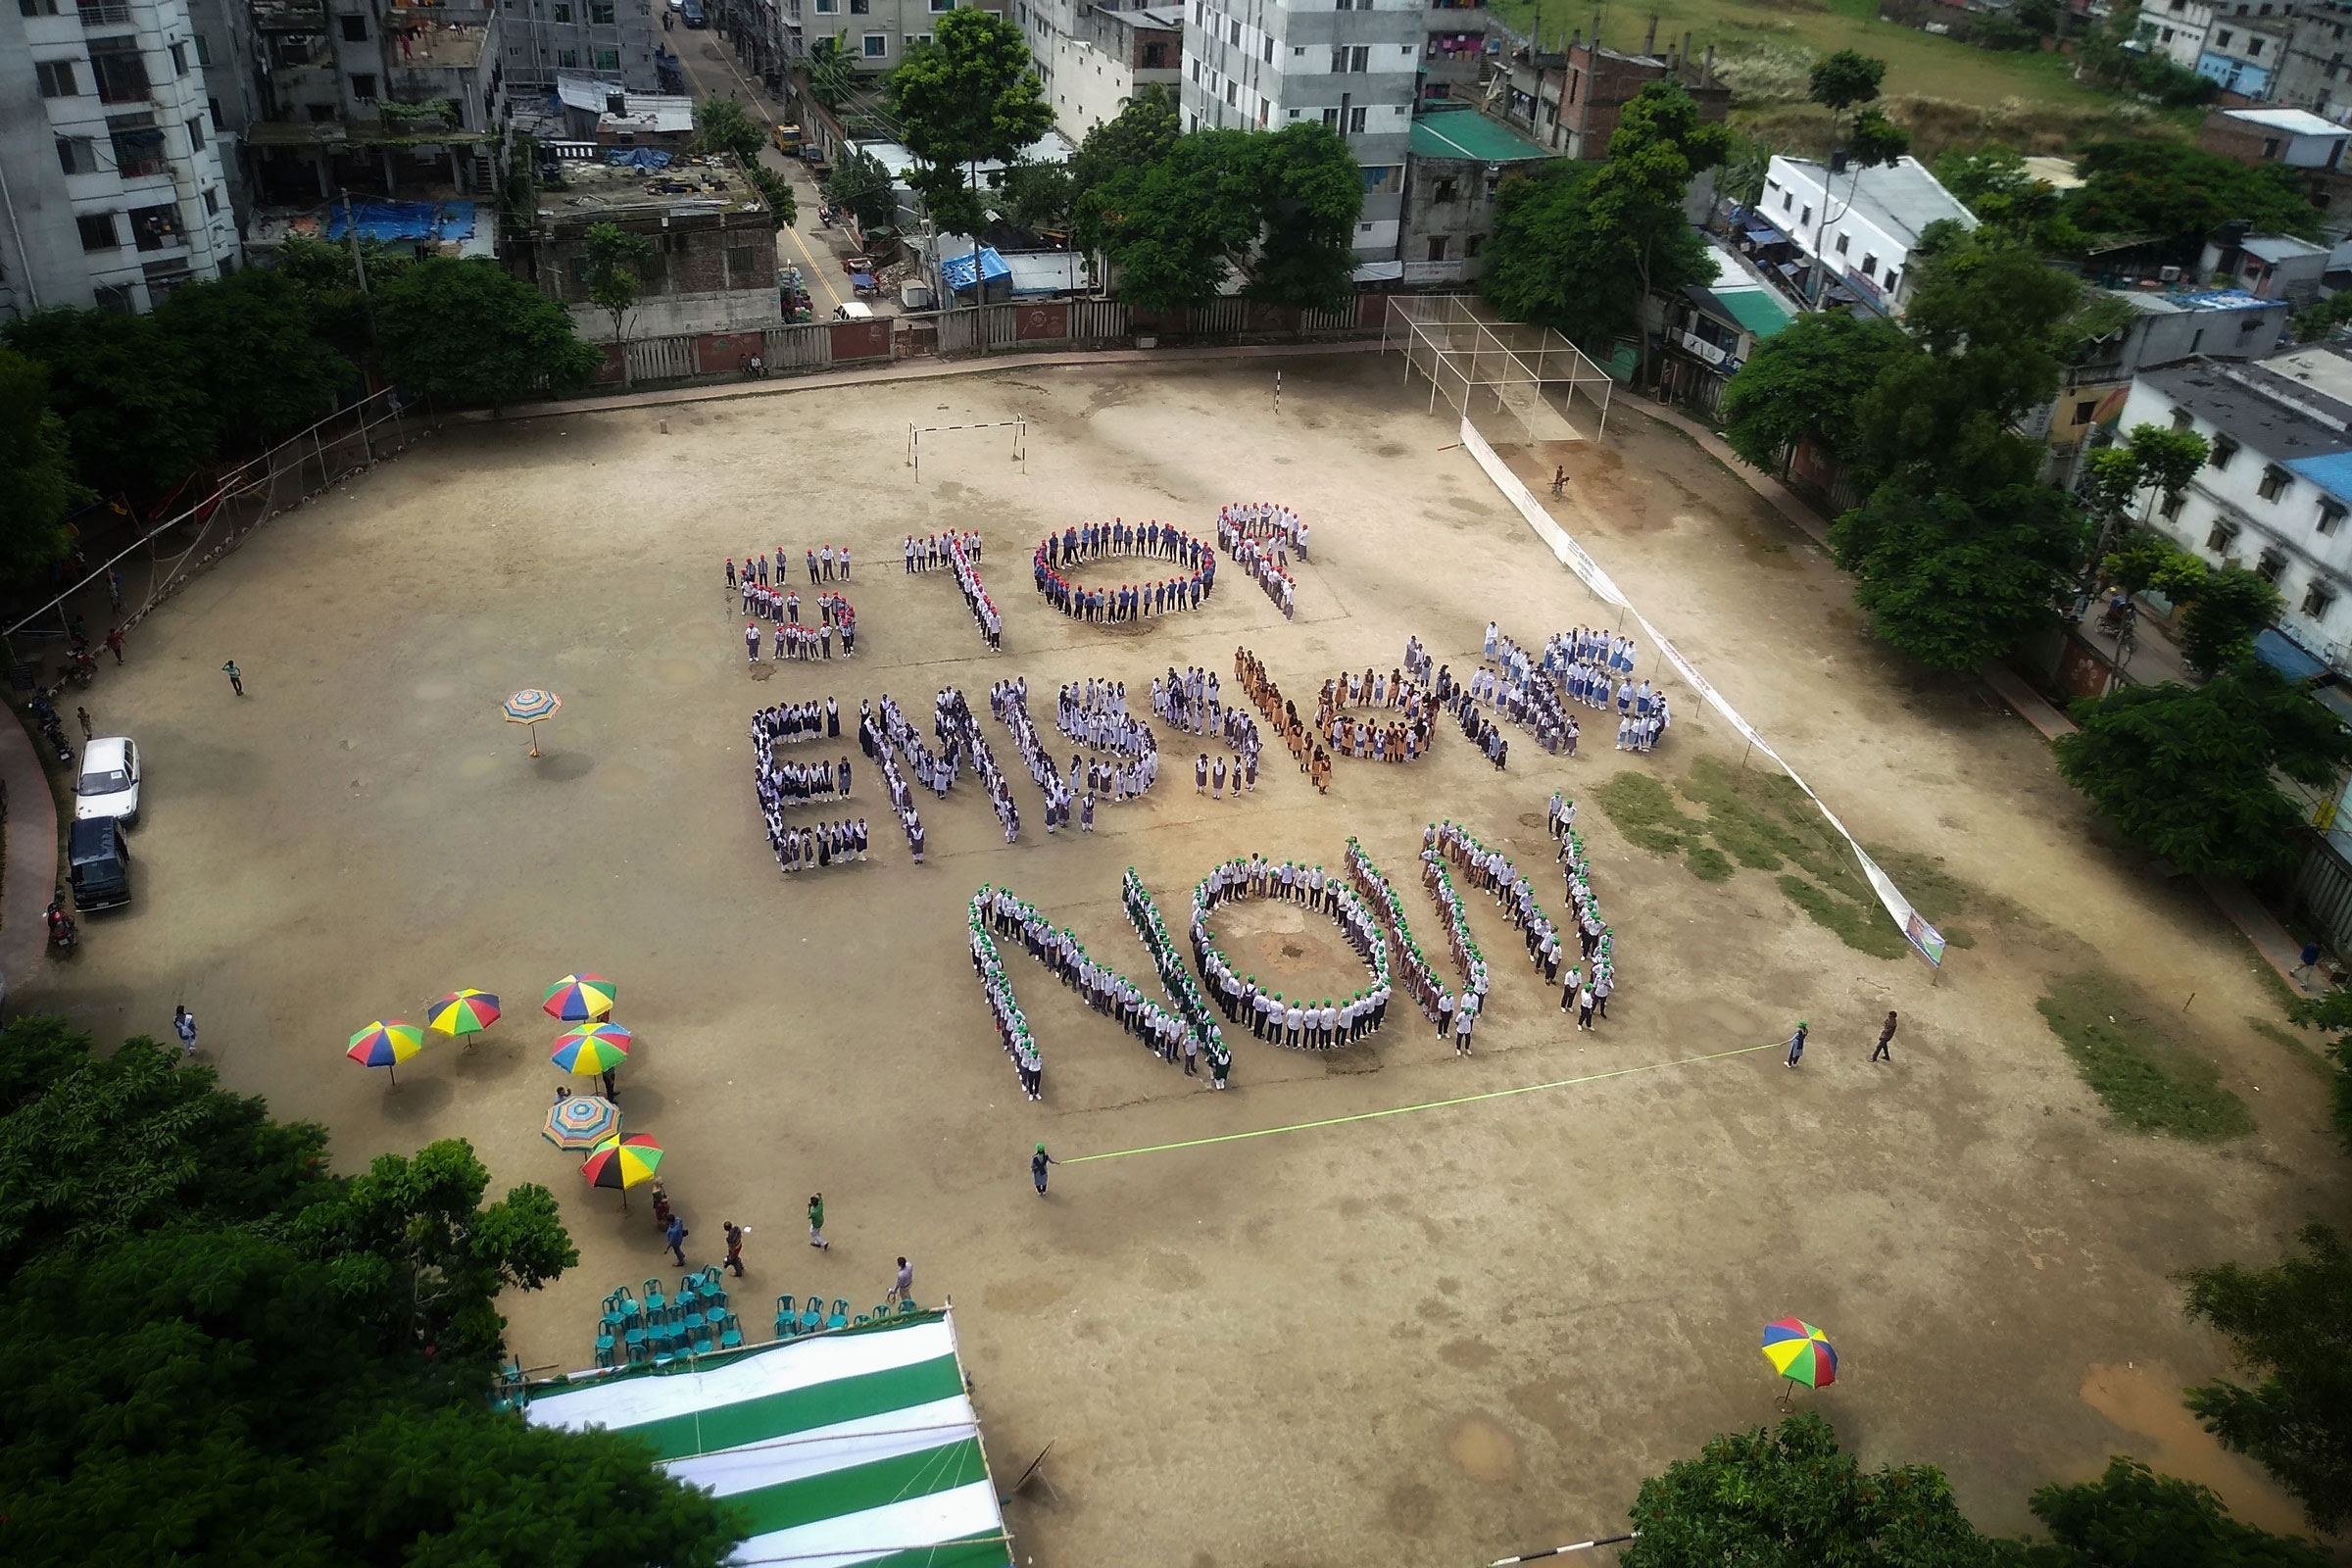 Students create a Human Formation to spell out the words "Stop Emissions Now" to demand strong action on the climate crisis in Dhaka, Bangladesh on 14 September 2019. (Syed Mahamudur Rahman—NurPhoto/Getty)